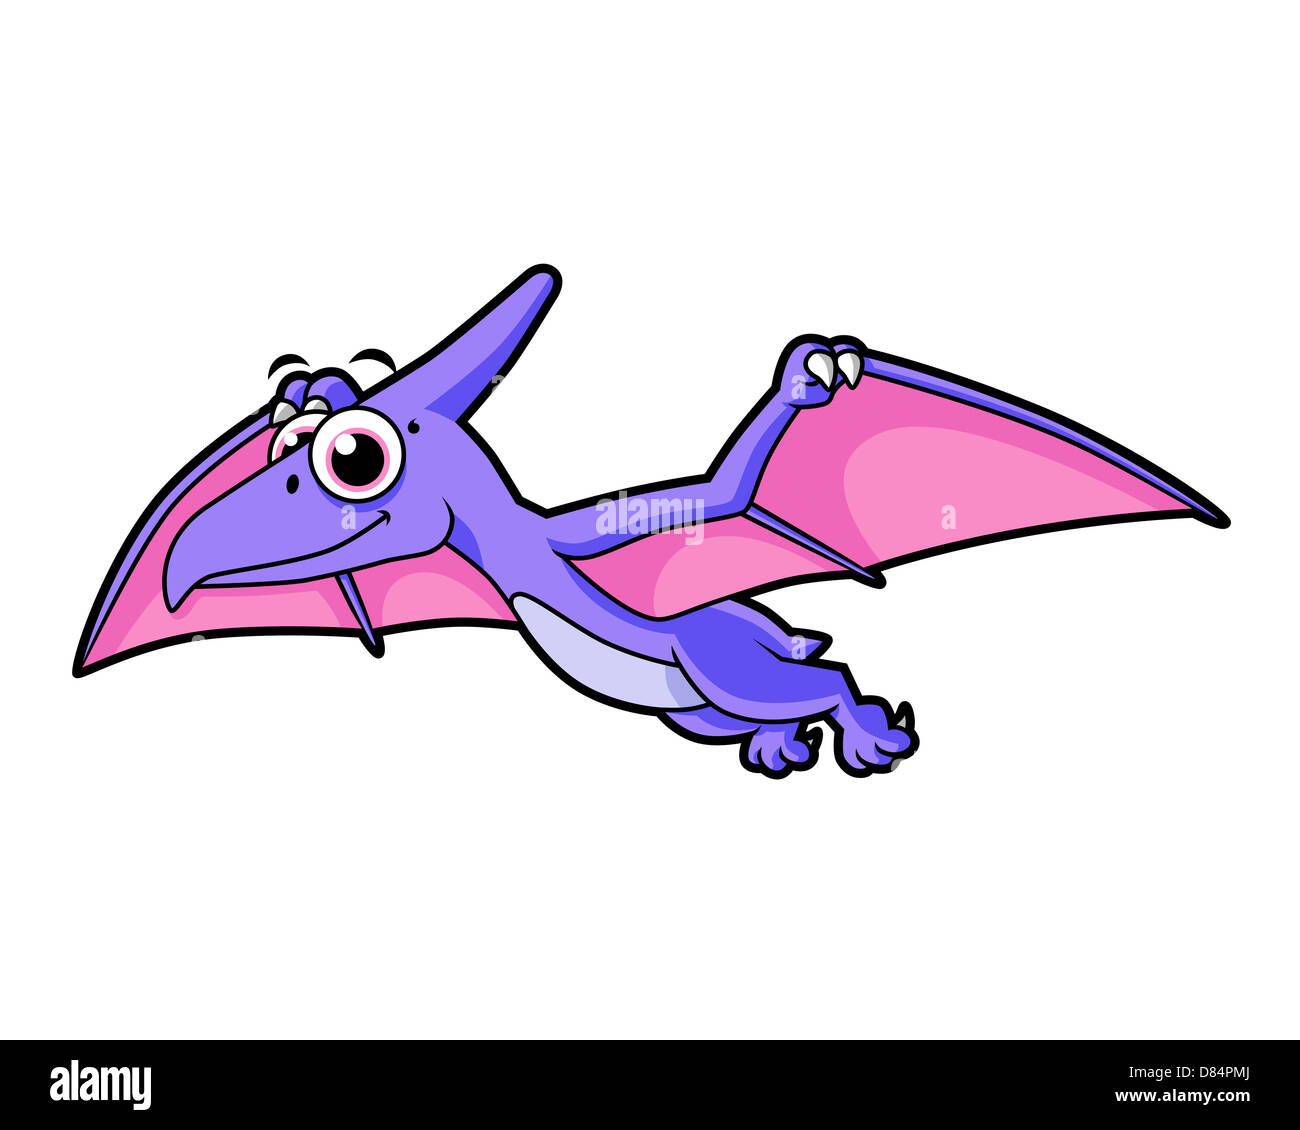 Cute illustration of a flying pterodactyl. Stock Photo